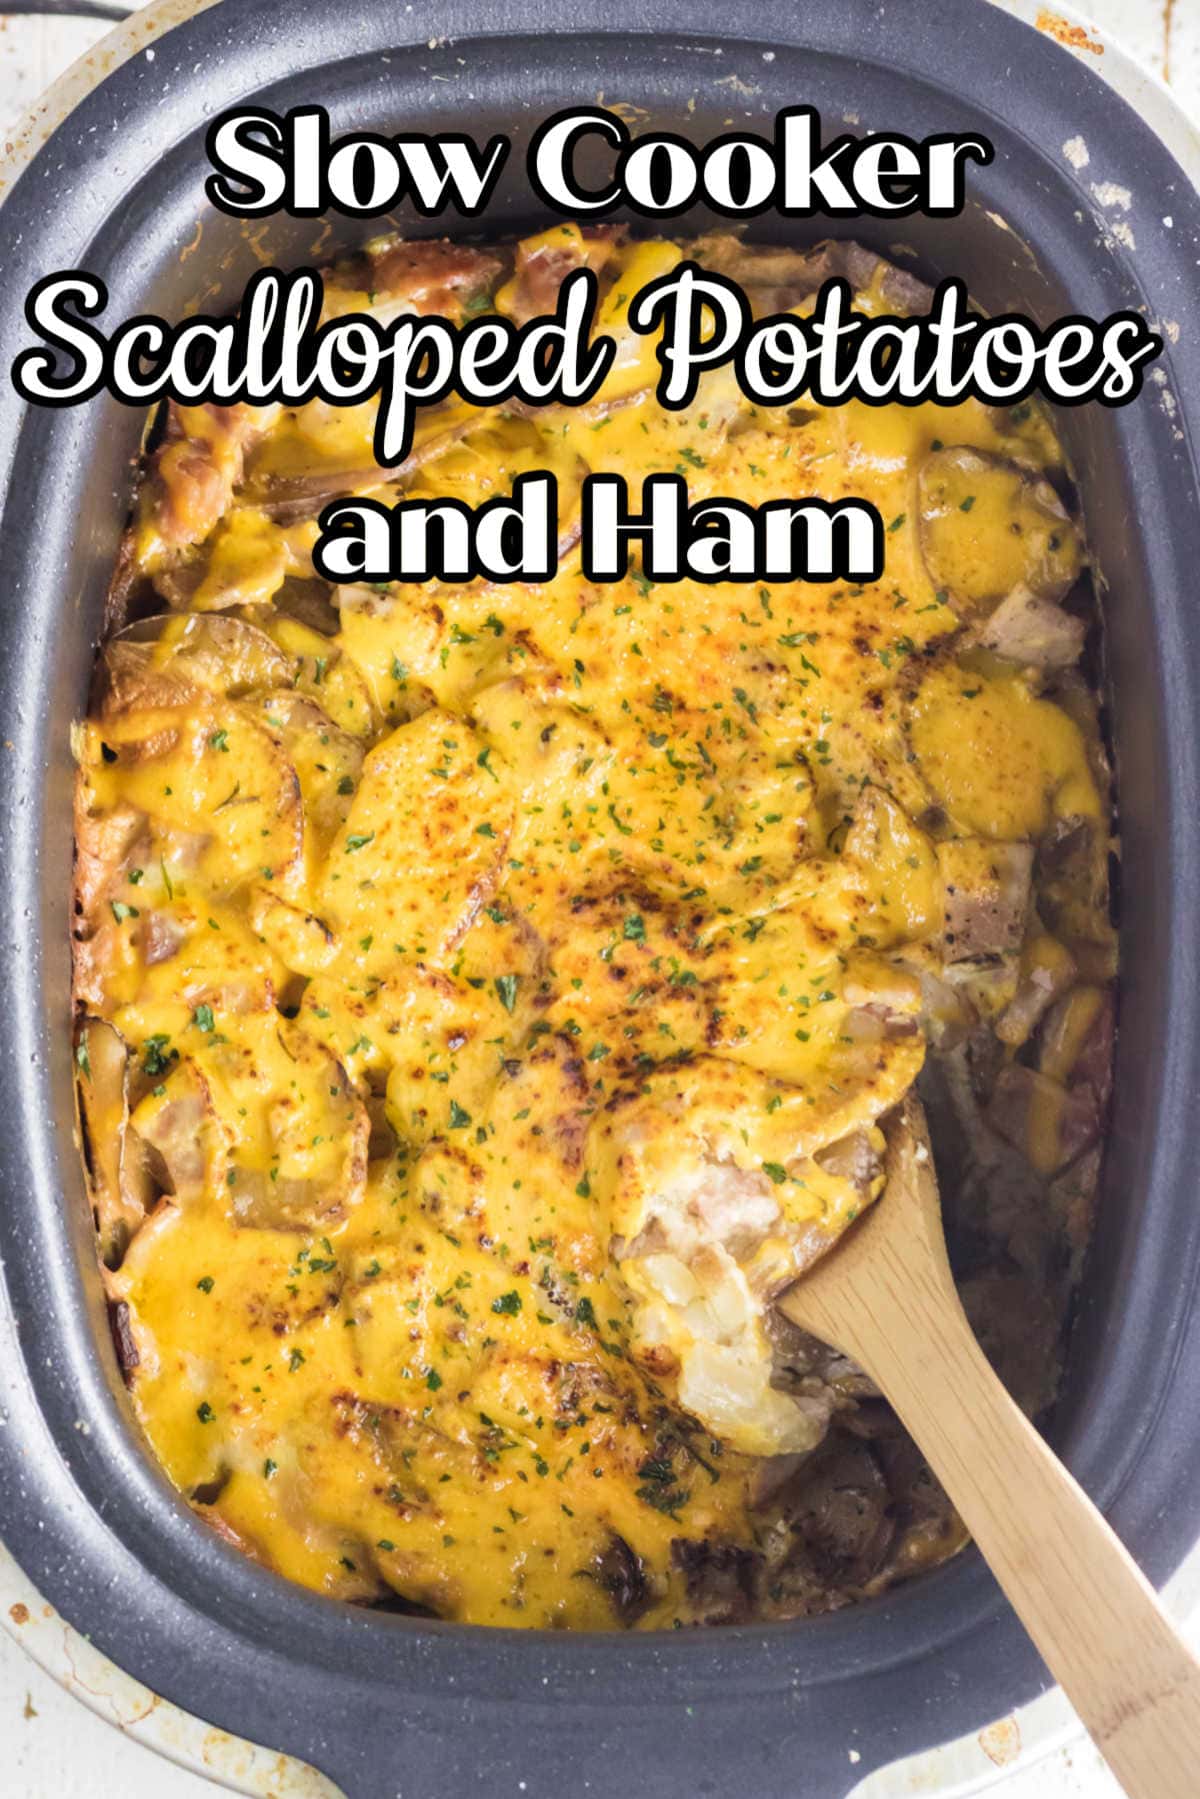 Scalloped potatoes in a slow cooker with a wooden spoon.